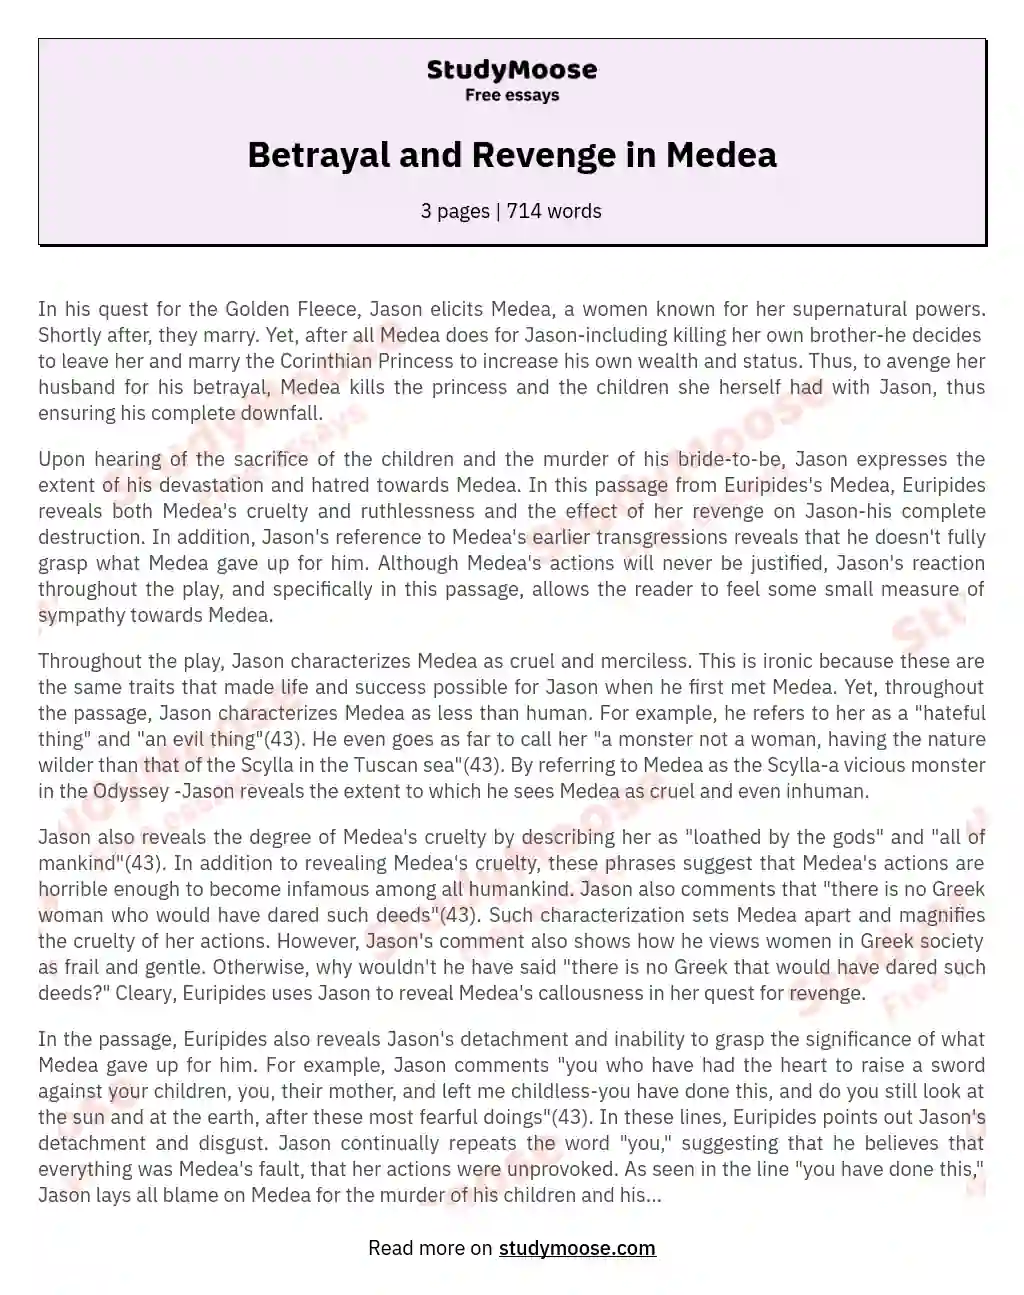 Betrayal and Revenge in Medea